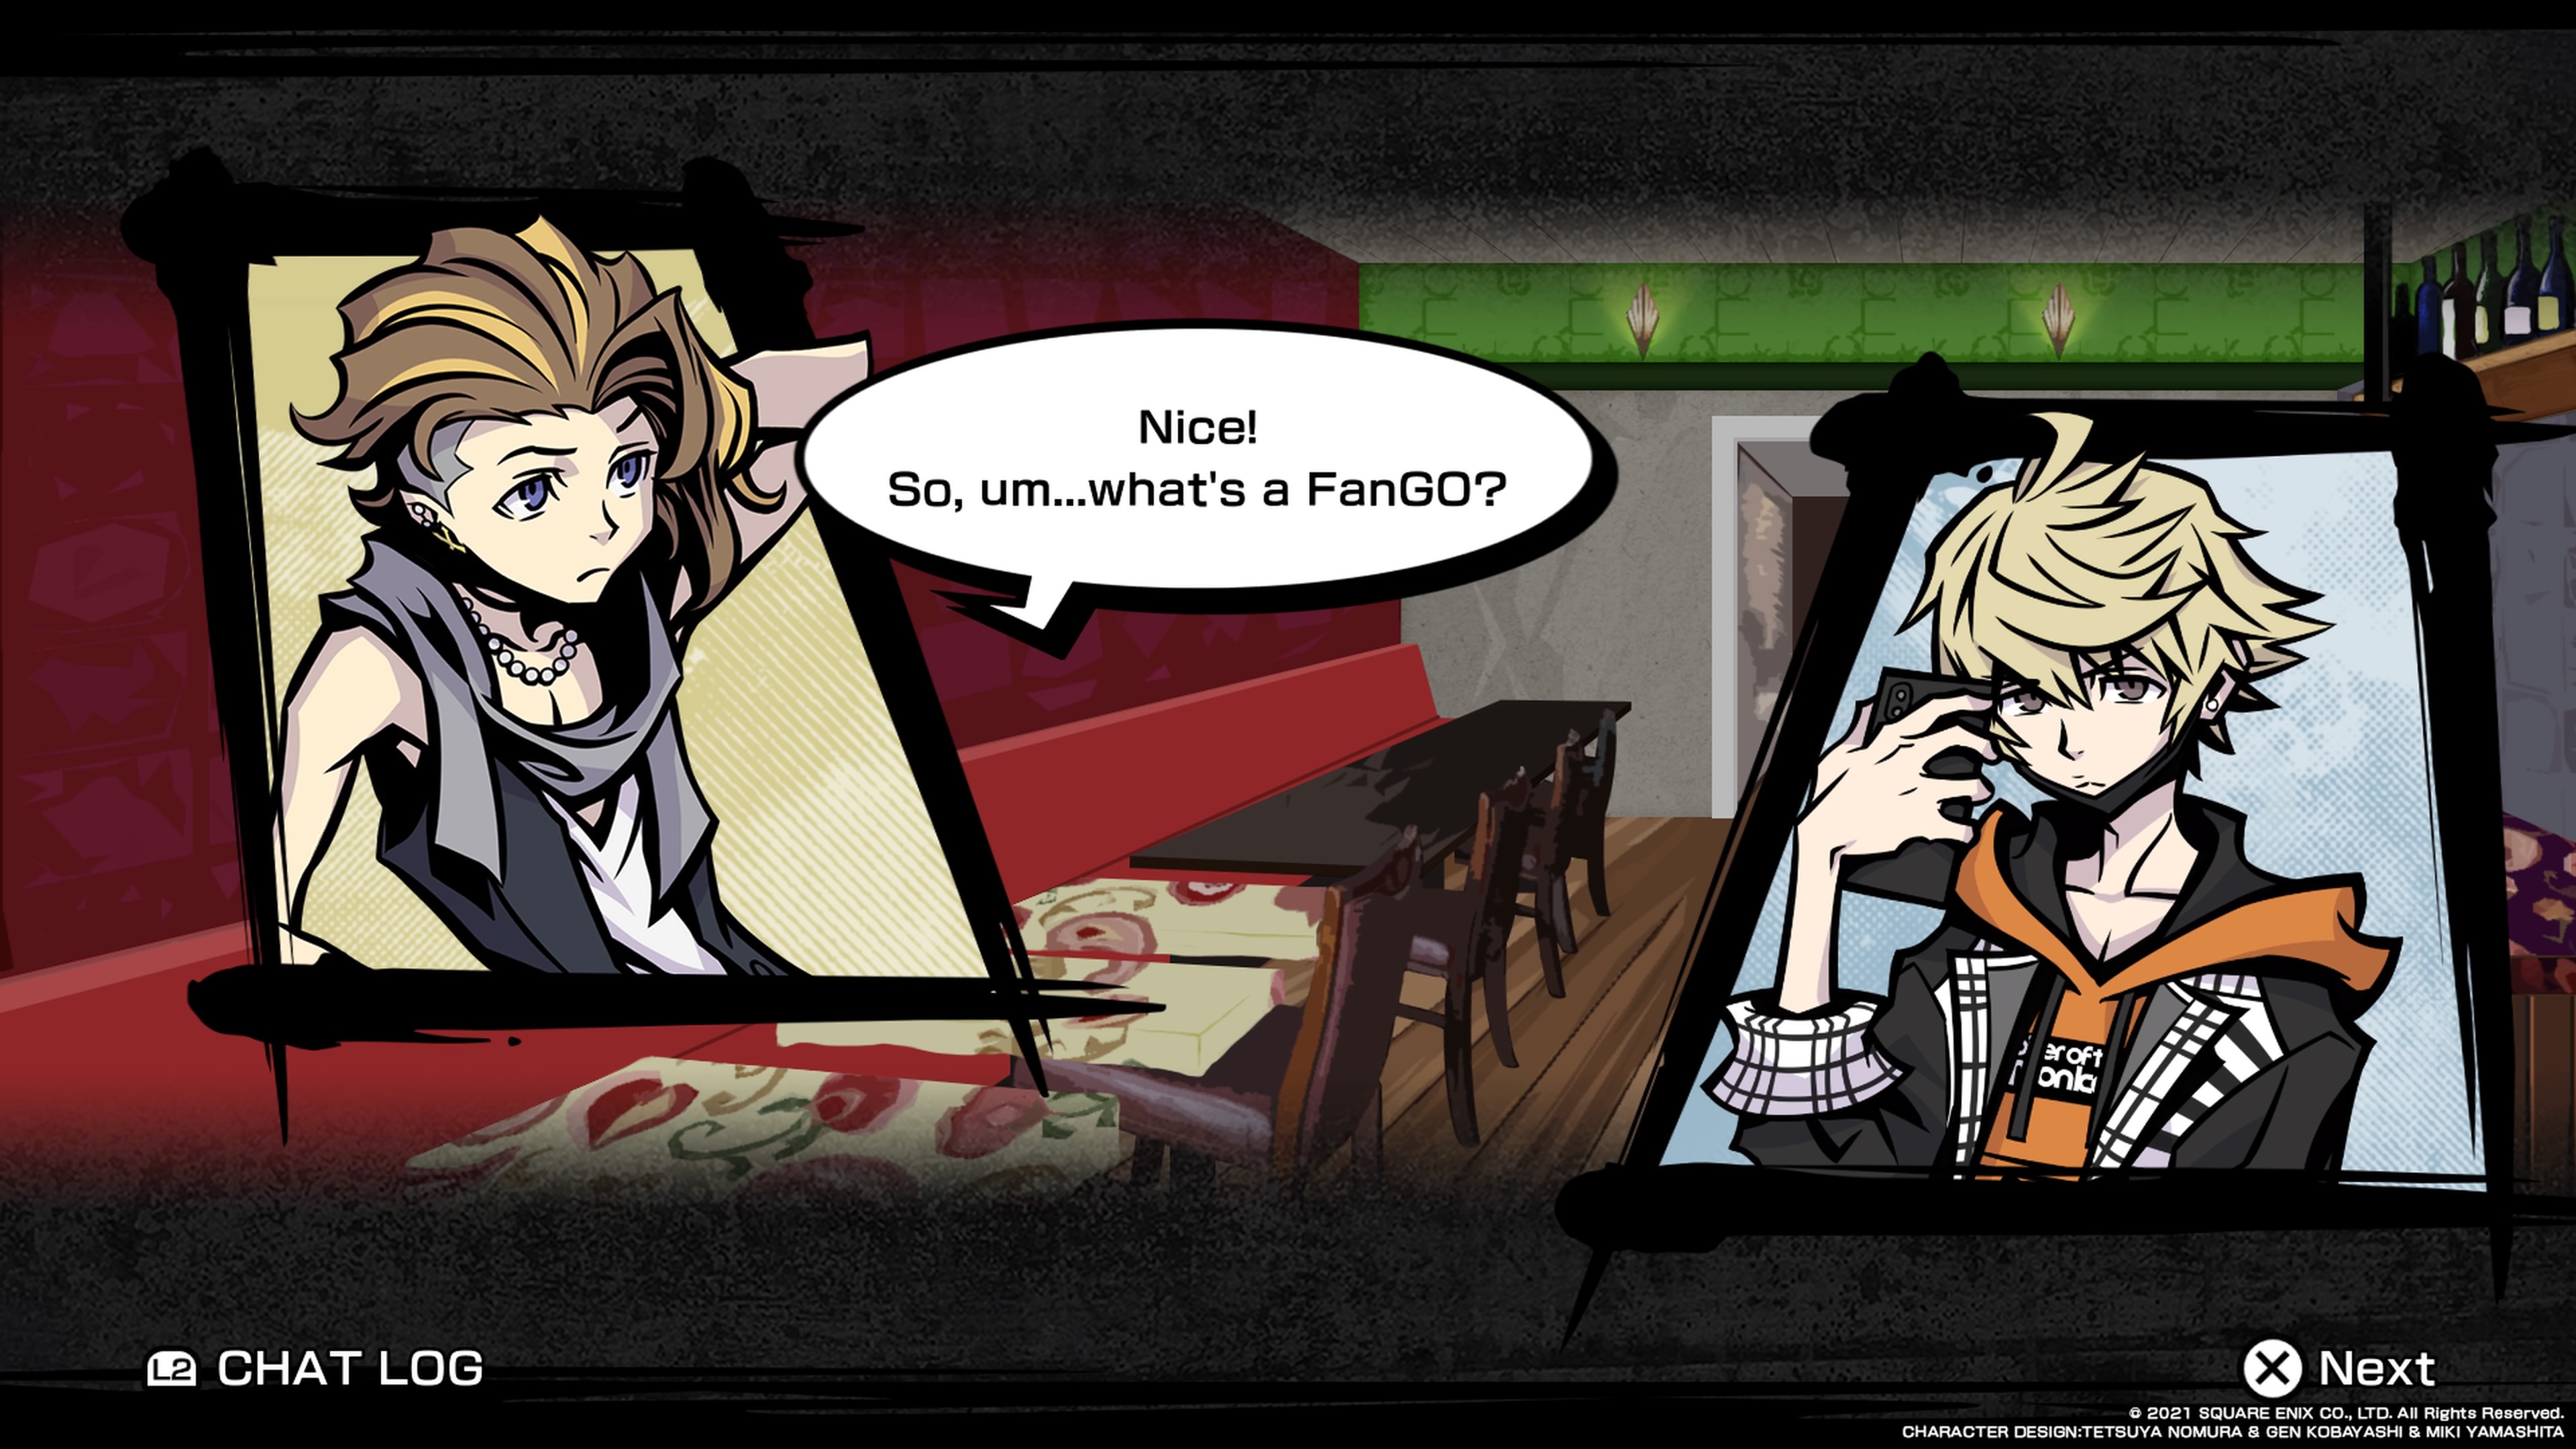 NEO The World Ends With You PS4 Review - A Blast From the Past